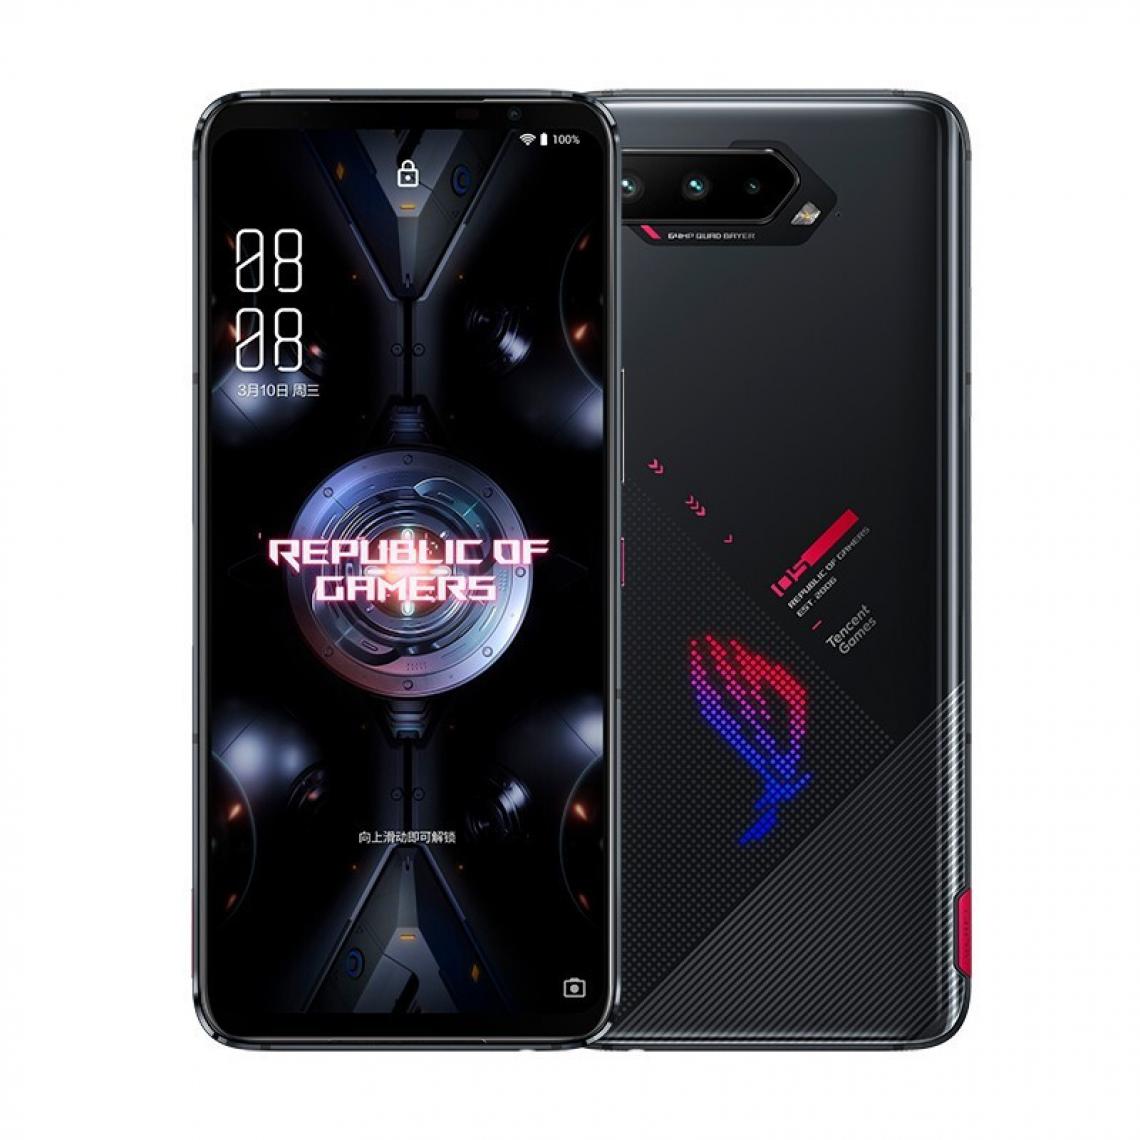 Asus - ROG 5 - Smartphone Android